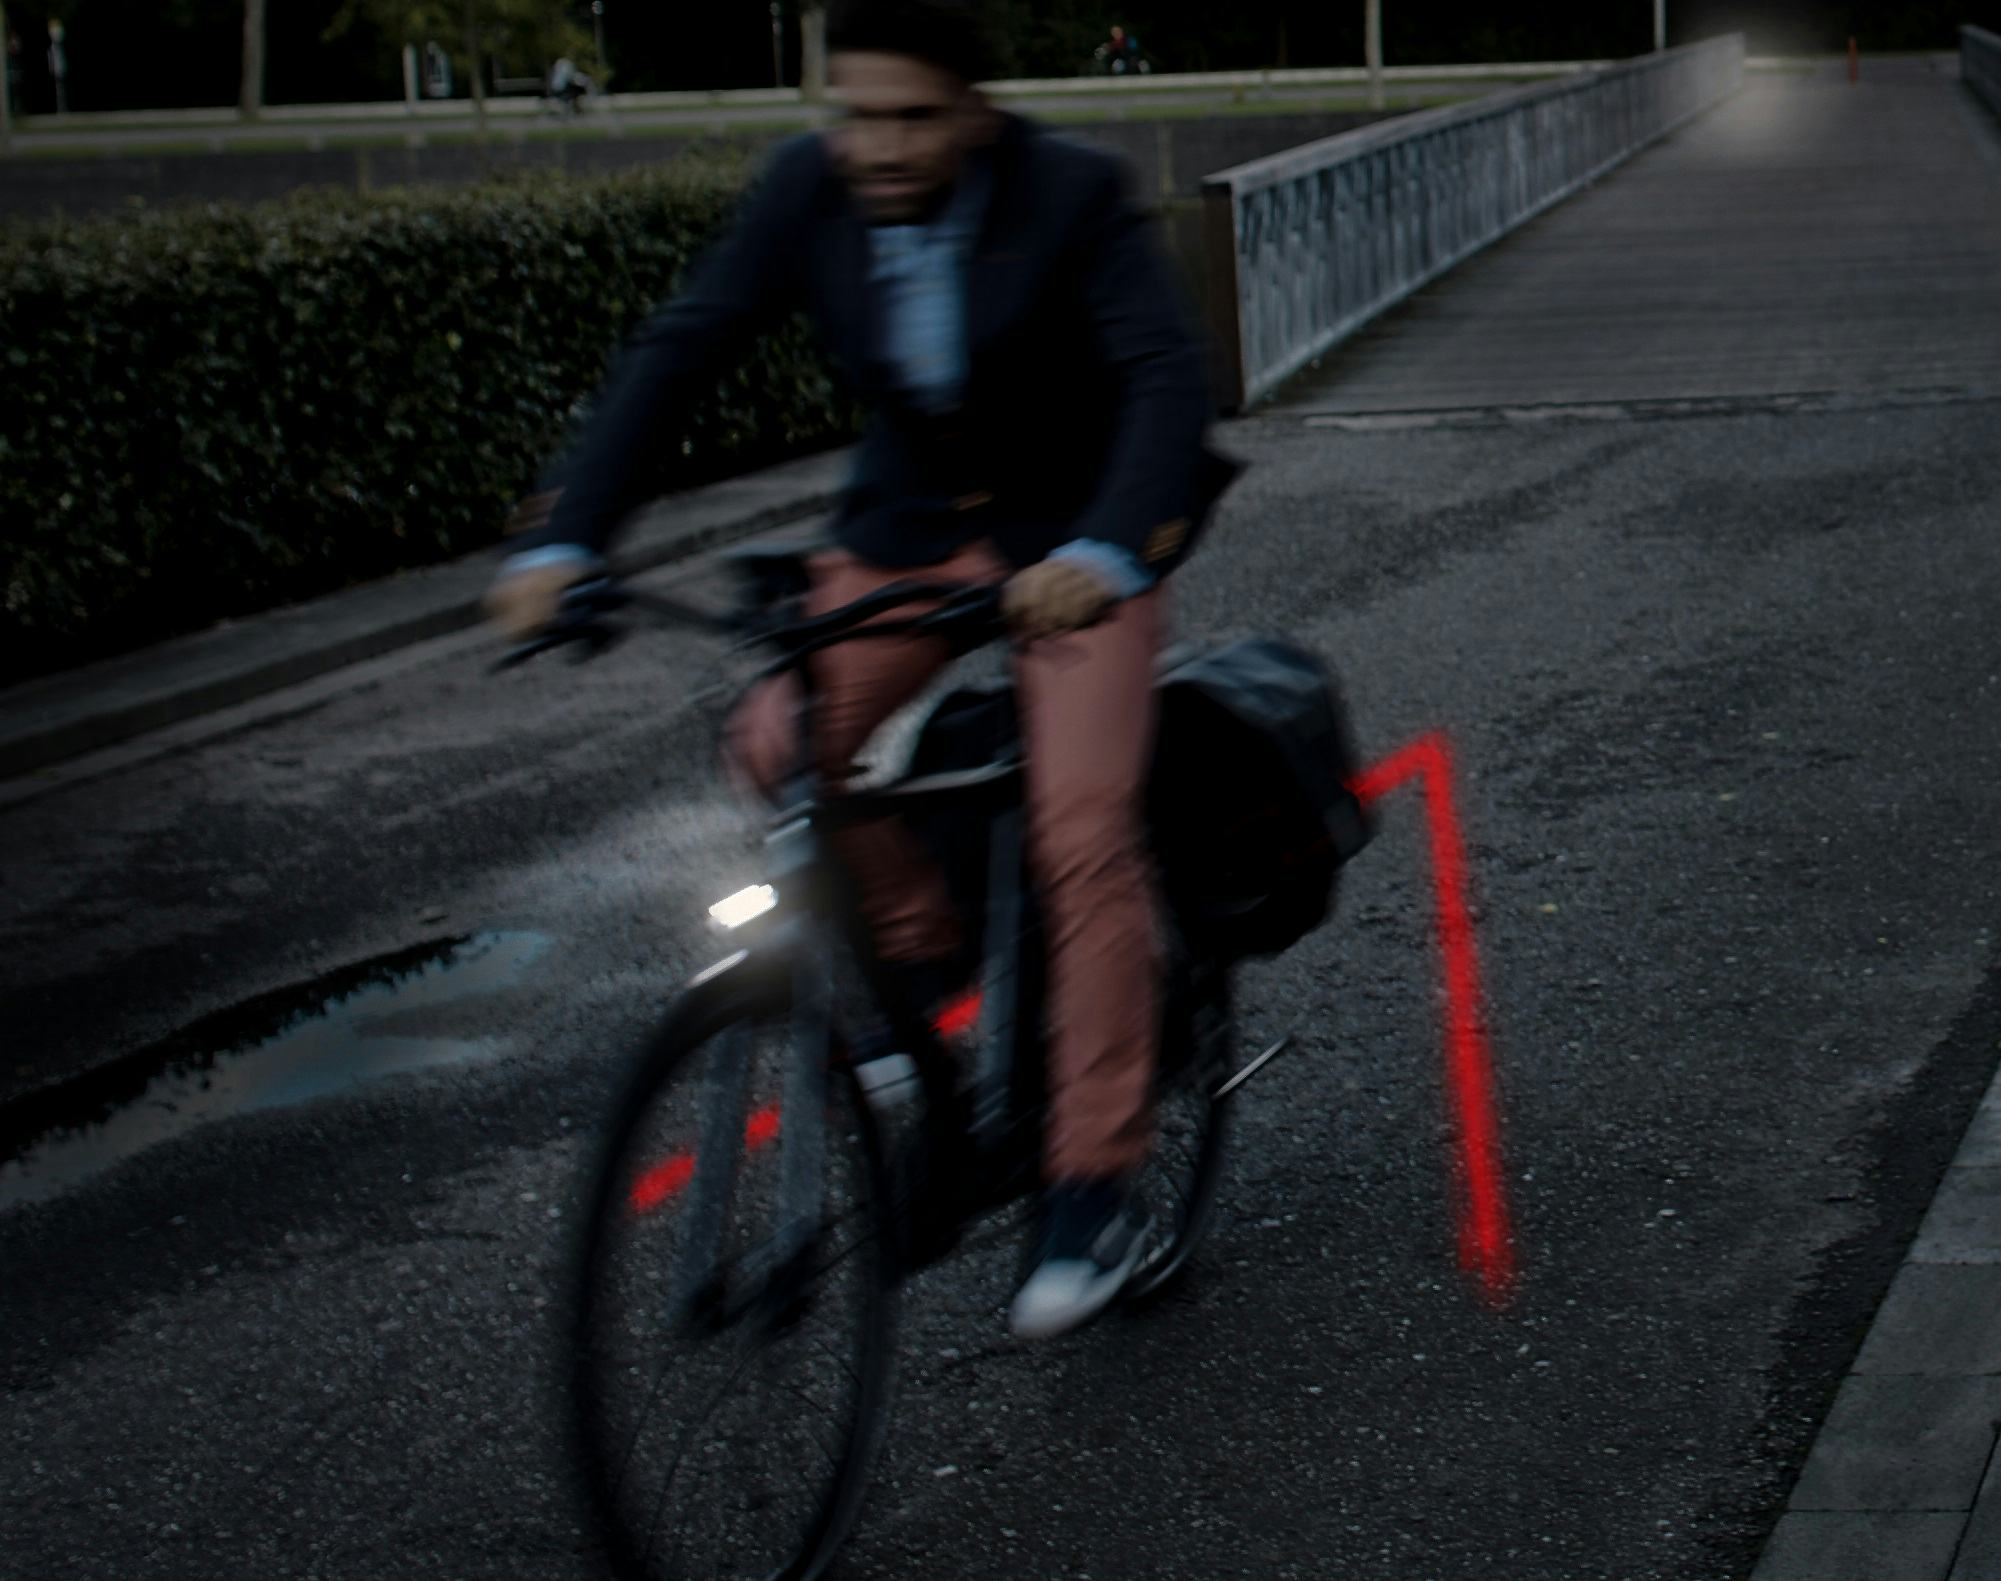 Two laserbeams are at the bike’s rear end projected on the road. – Photo Koga 